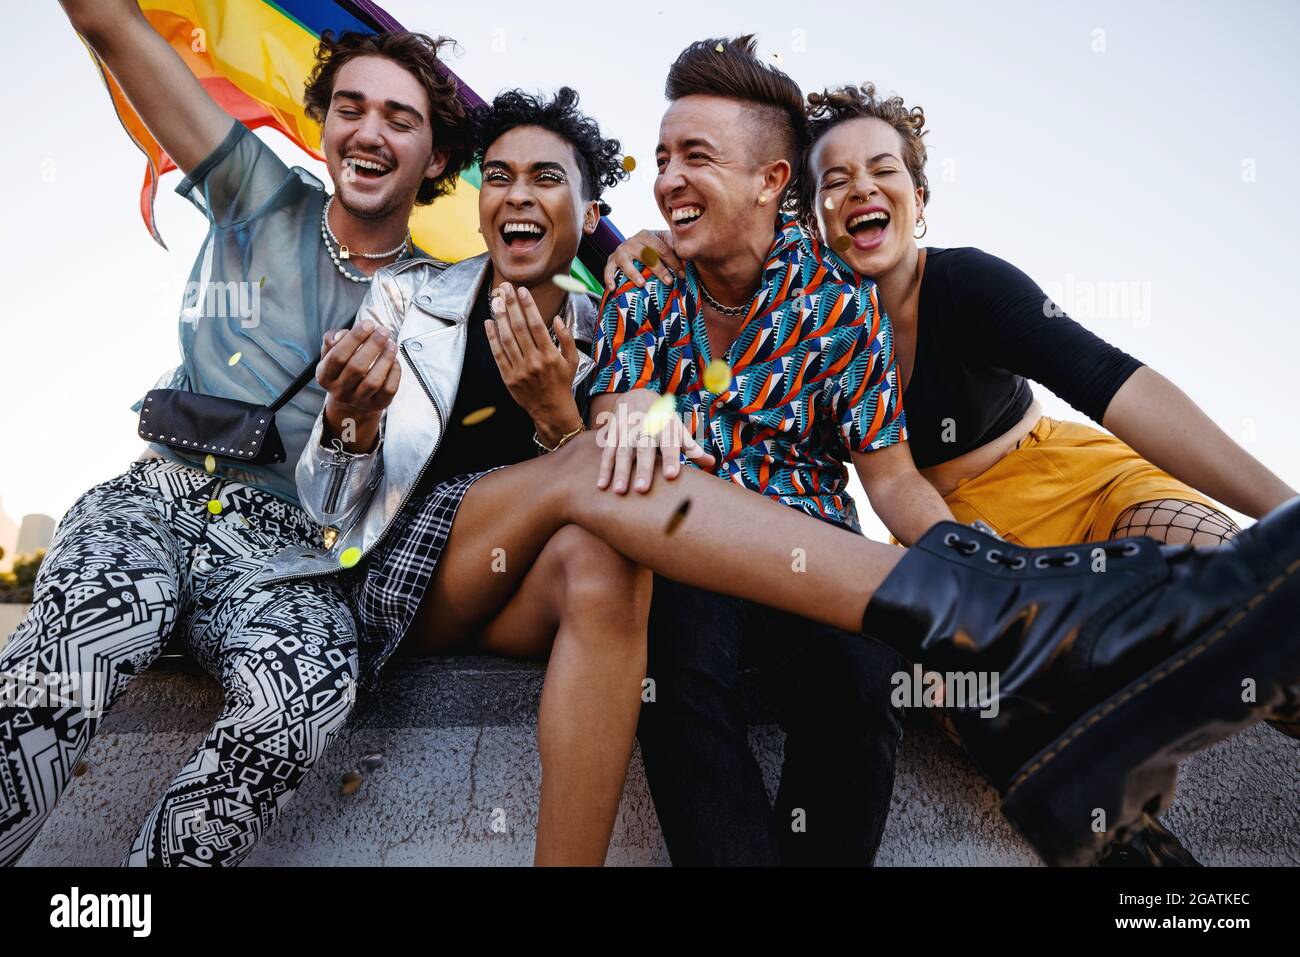 Young people celebrating pride while sitting together. Four members of the LGBTQ+ community smiling cheerfully while raising the pride flag. Group of Stock Photo